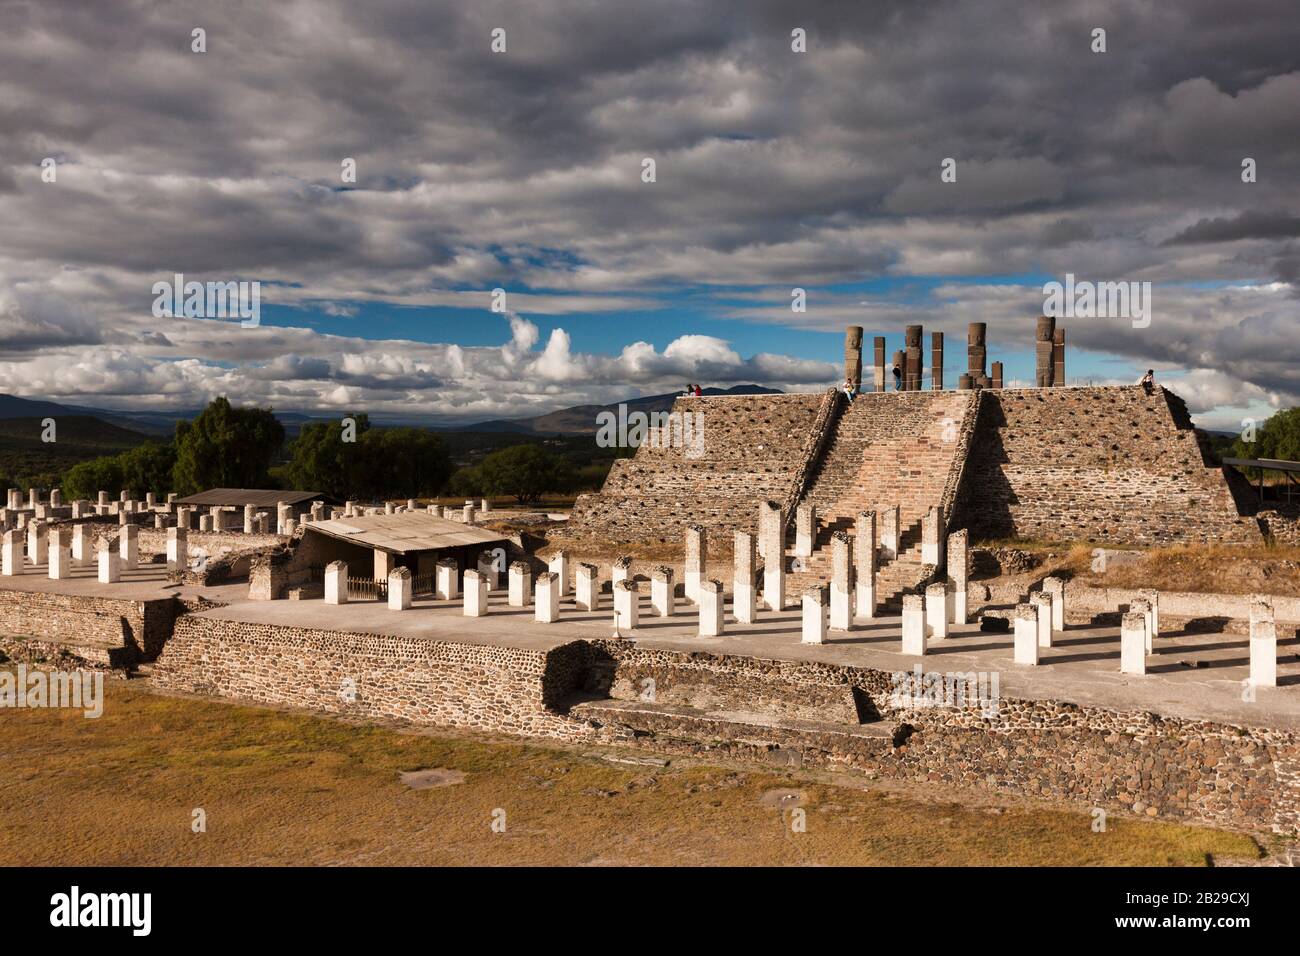 Pyramid of Quetzalcoatl, Tula archaeological site, Toltec archaeological site, state of Hidalgo, Mexico, Central America Stock Photo